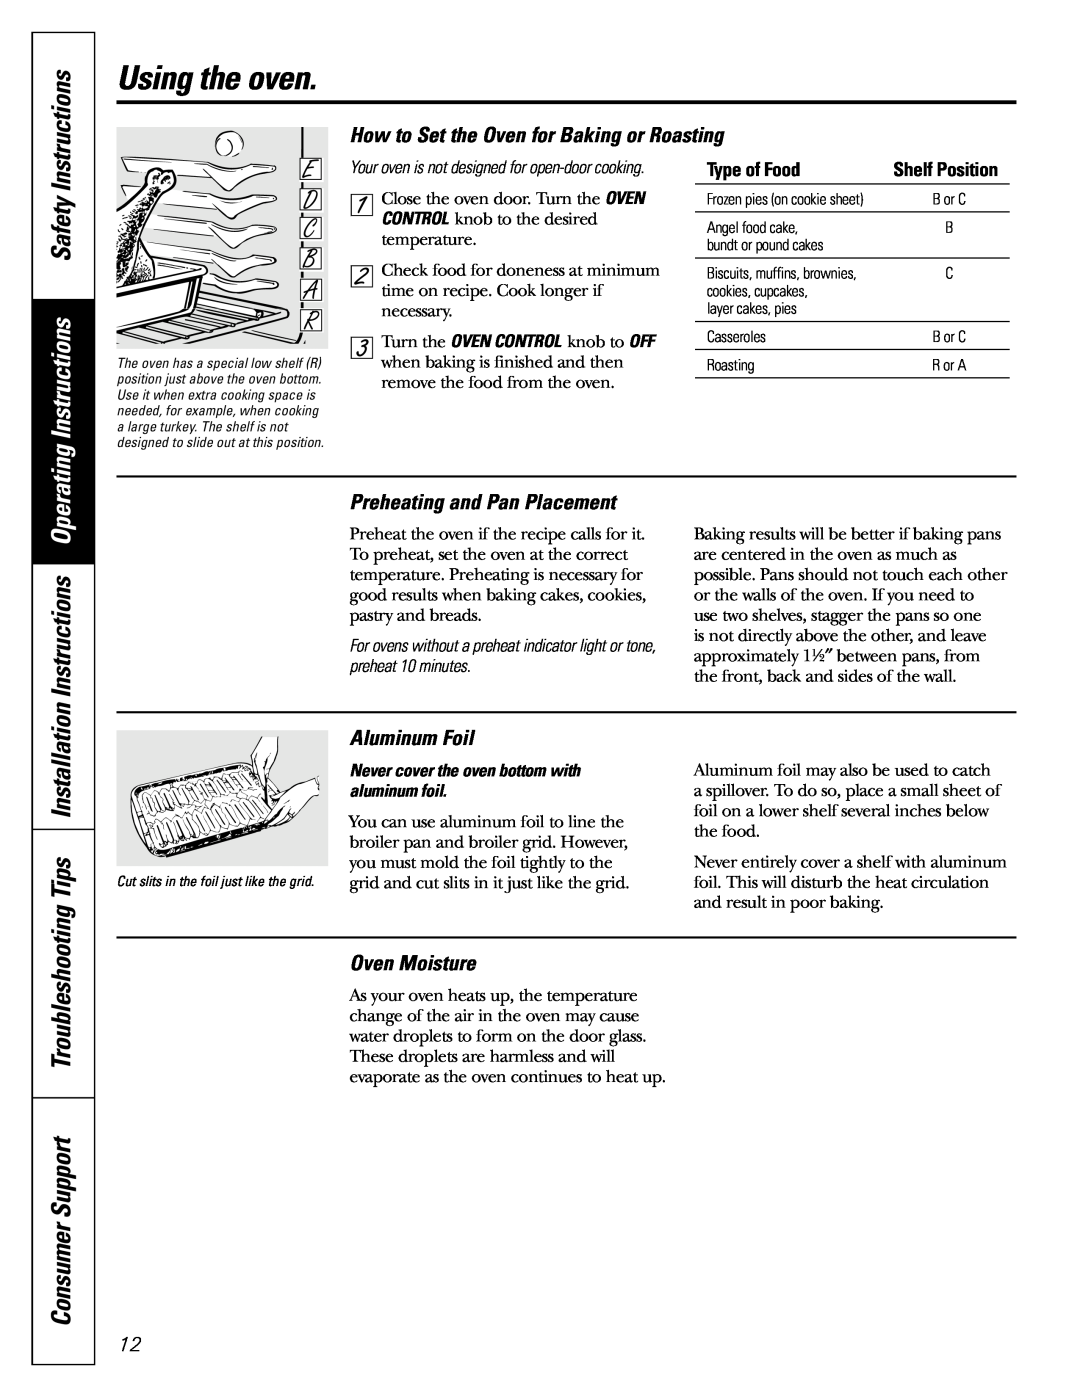 GE JGBC20 Instructions Safety, Instructions Operating, How to Set the Oven for Baking or Roasting, Aluminum Foil 